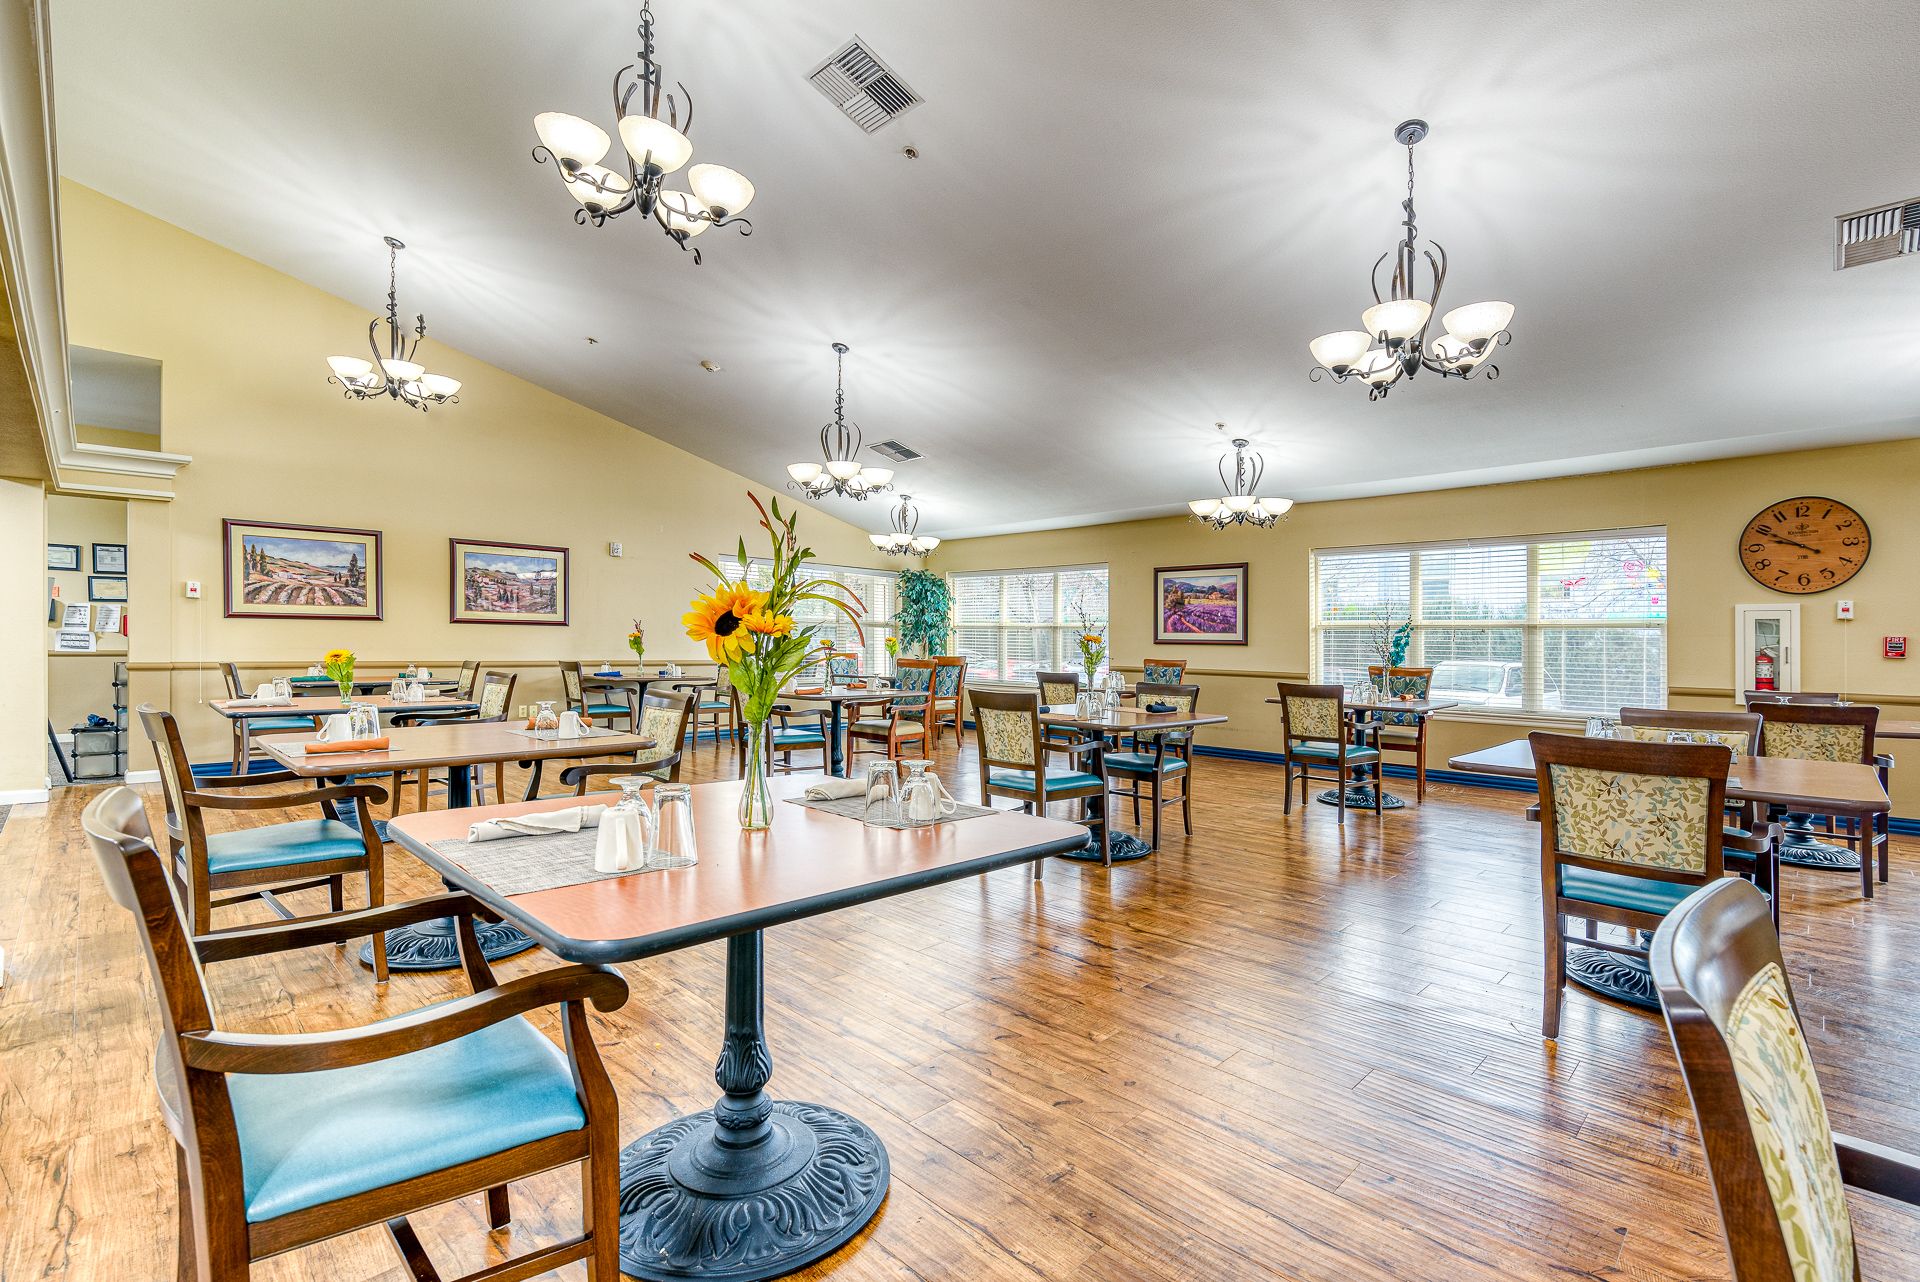 Awbrey Place Assisted Living and Memory Care 2